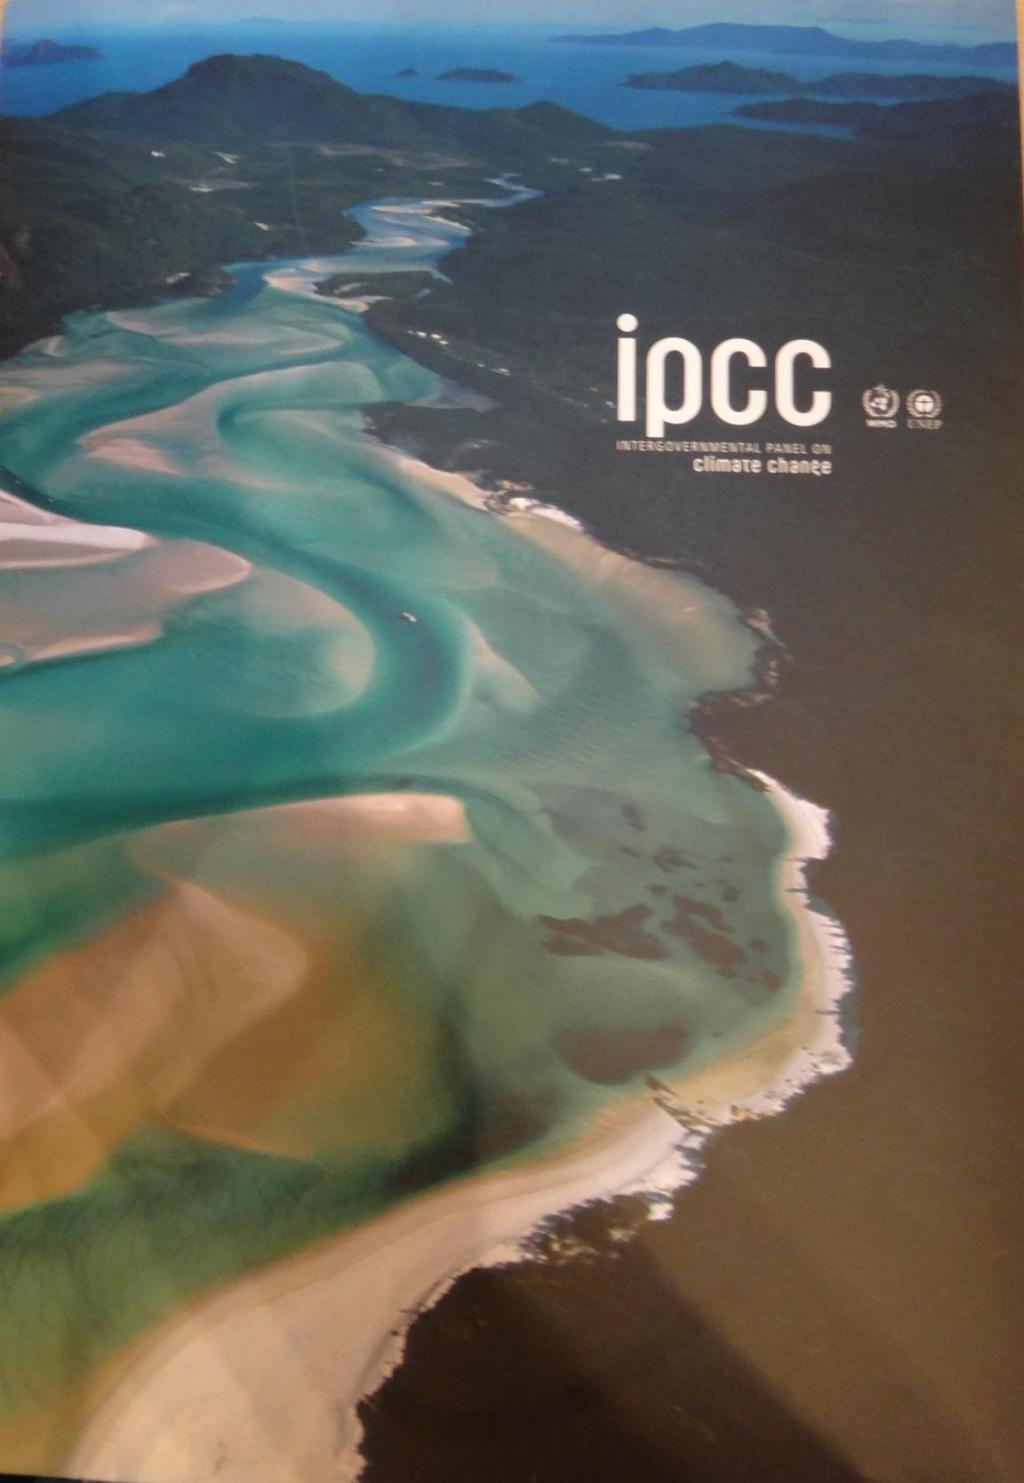 IPCC revising national GHG accounting guidance with improved